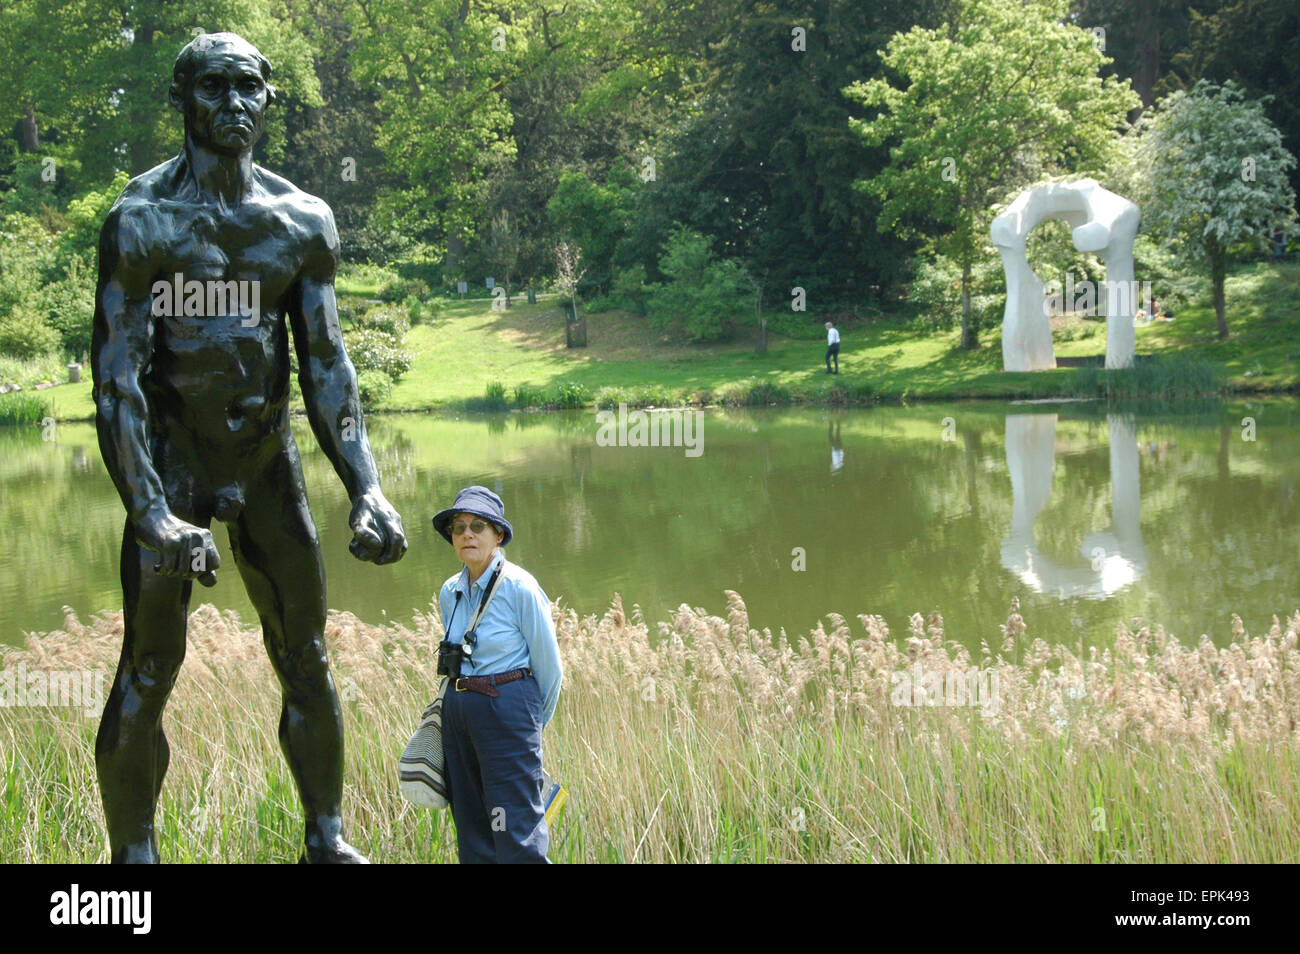 Rodin sculpture towering over tourist at Rodin and Moore Exhibition at Compton Verney, Warwickshire, England 2014 Stock Photo